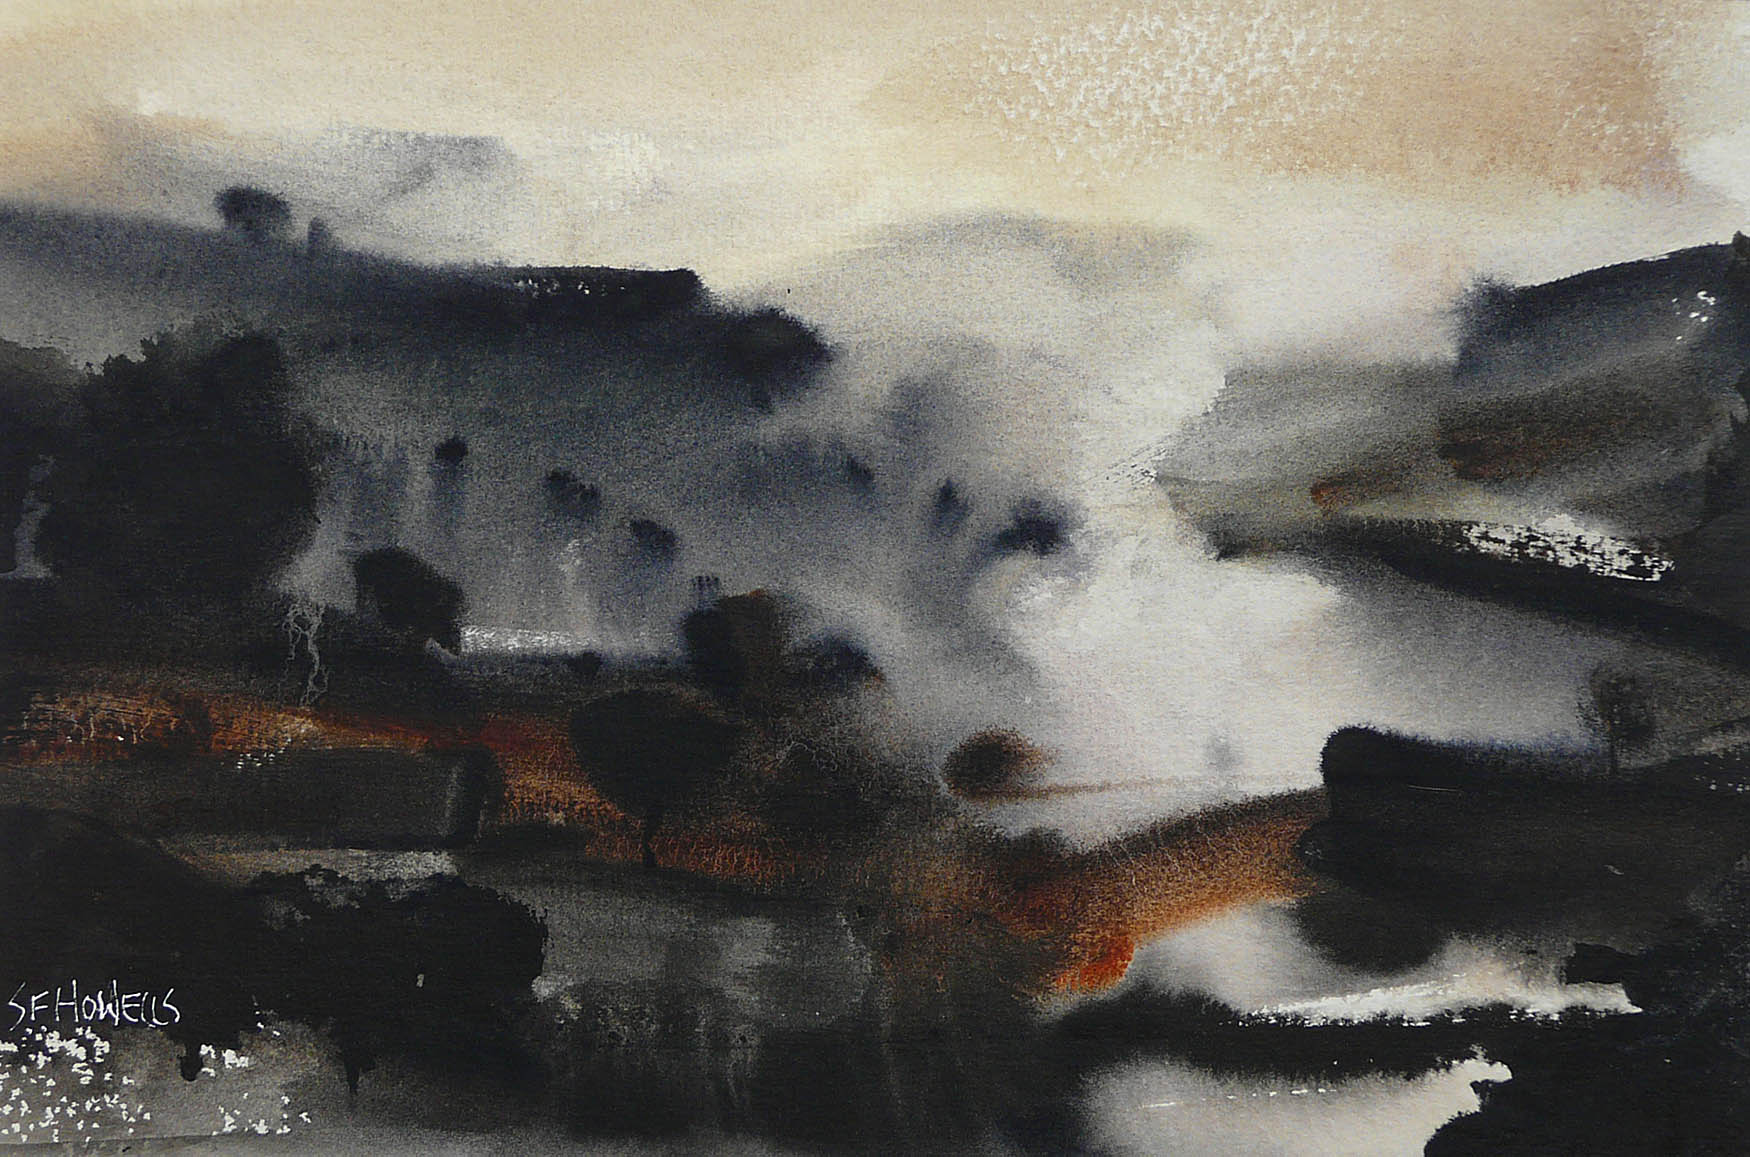 Mist over the Loch by Sue Howells, Water | Landscape